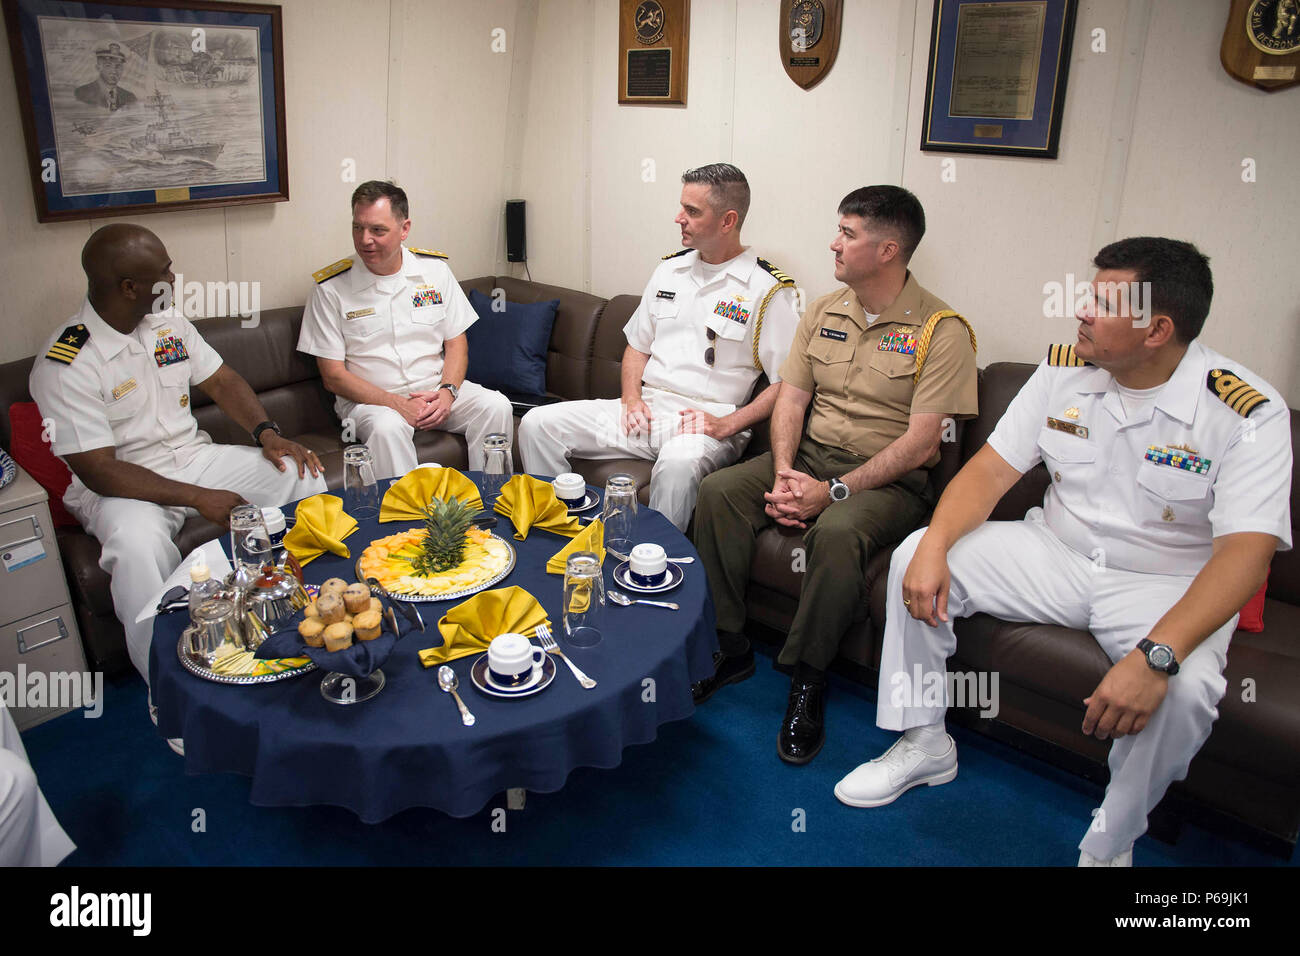 160519-N-MD297-077 CARTAGENA, Colombia (May 19, 2016) Rear Adm. George Ballance, commander, U.S. 4th Fleet, speaks to Cmdr. Robert Francis, commanding officer of the Arleigh Burke-class guided-missile destroyer USS Lassen (DDG 82), while visiting the ship in Cartagena, Colombia. Lassen is currently underway in support of Operation Martillo, a joint operation with the U.S. Coast Guard and partner nations within the 4th Fleet area of responsibility. Operation Martillo is being led by Joint Interagency Task Force South, in support of U.S. Southern Command. (U.S. Navy photo by Mass Communication S Stock Photo